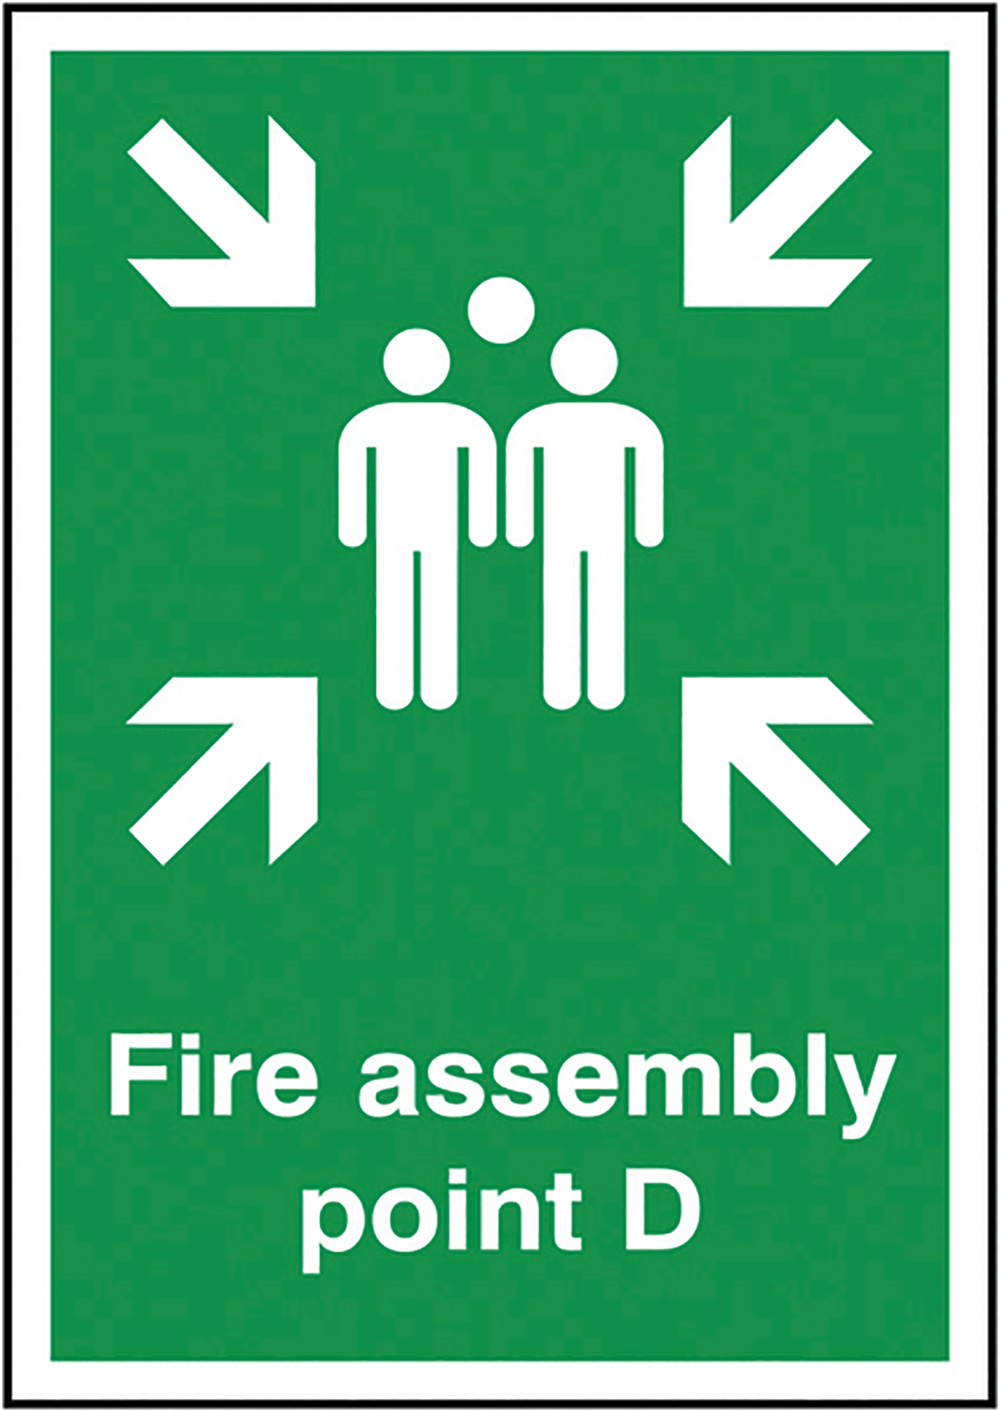 Fire Assembly Point D  297x210mm Self Adhesive Vinyl Safety Sign  